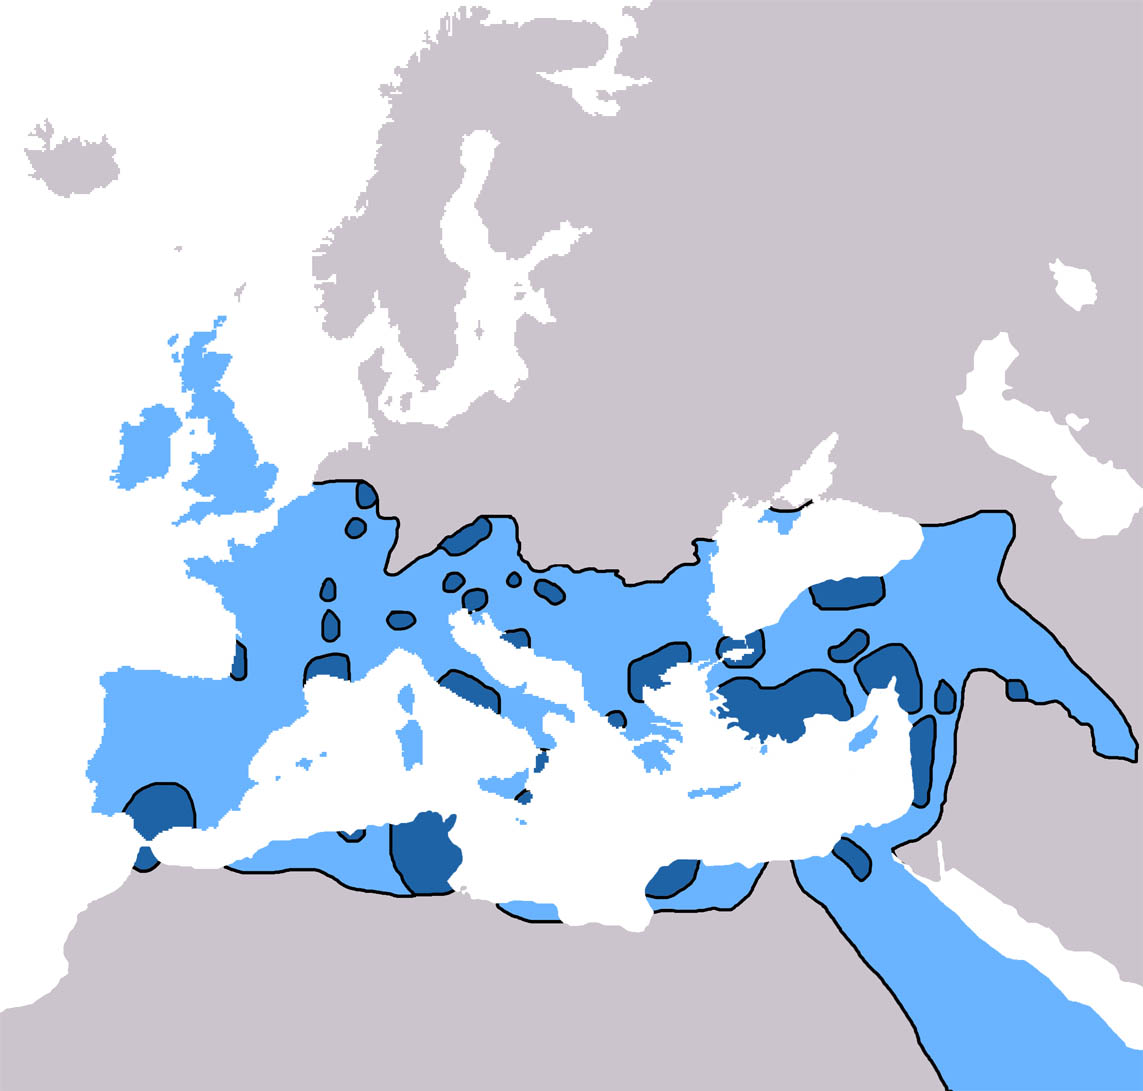 Spread of Christianity to 325 AD (dark blue) and 600 AD (light blue).